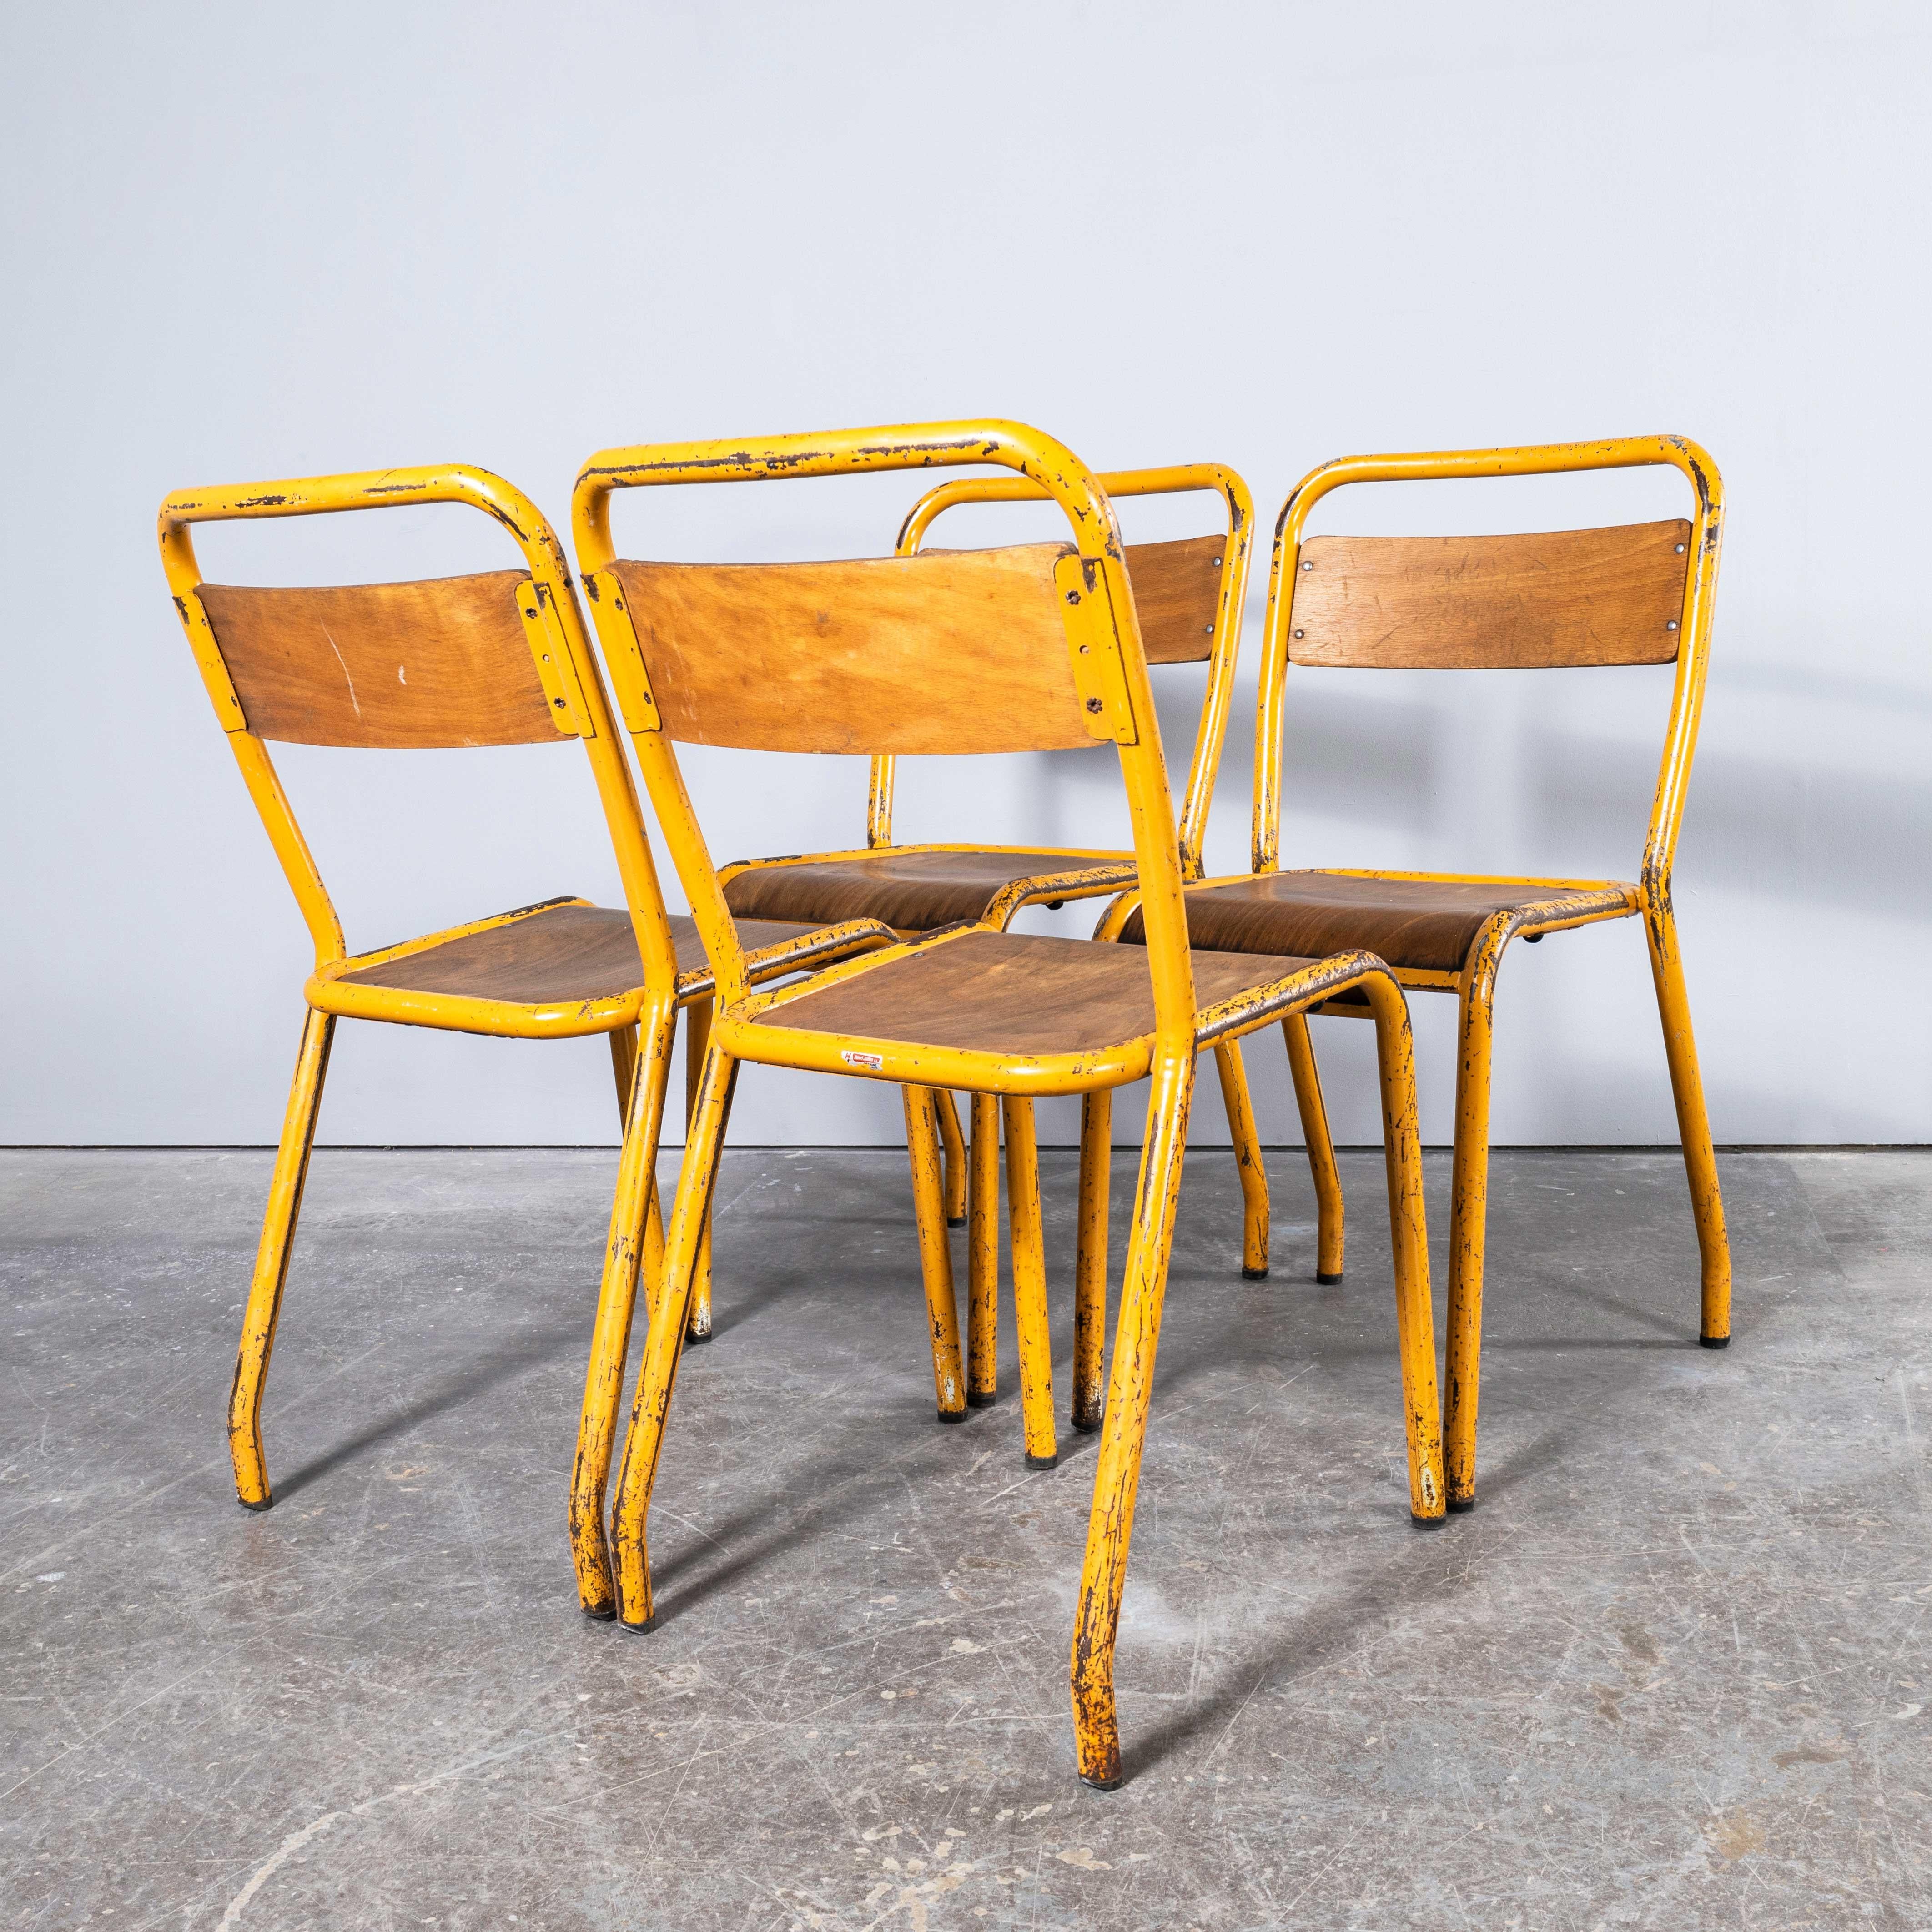 1950's Original Yellow French Tolix Wood Seat Metal Bistro Dining Chair - Large  For Sale 6